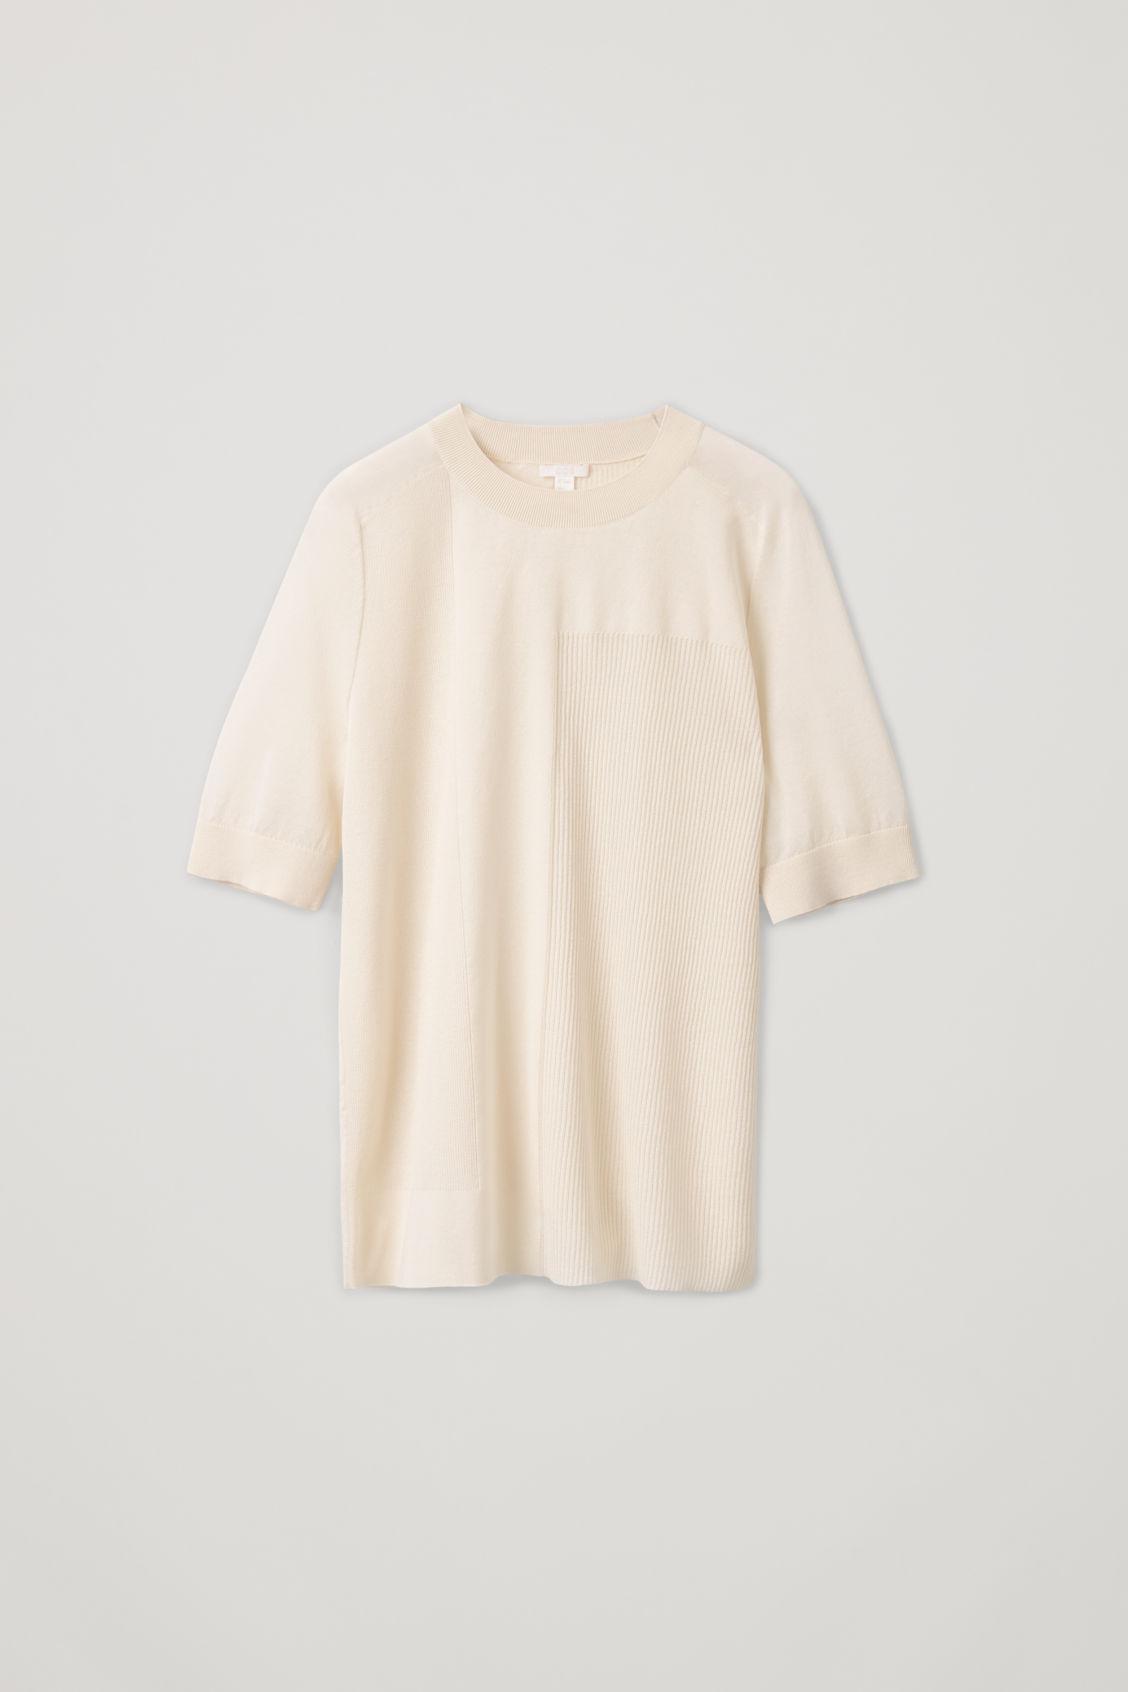 COS Multi-rib Knitted Top in Natural - Lyst